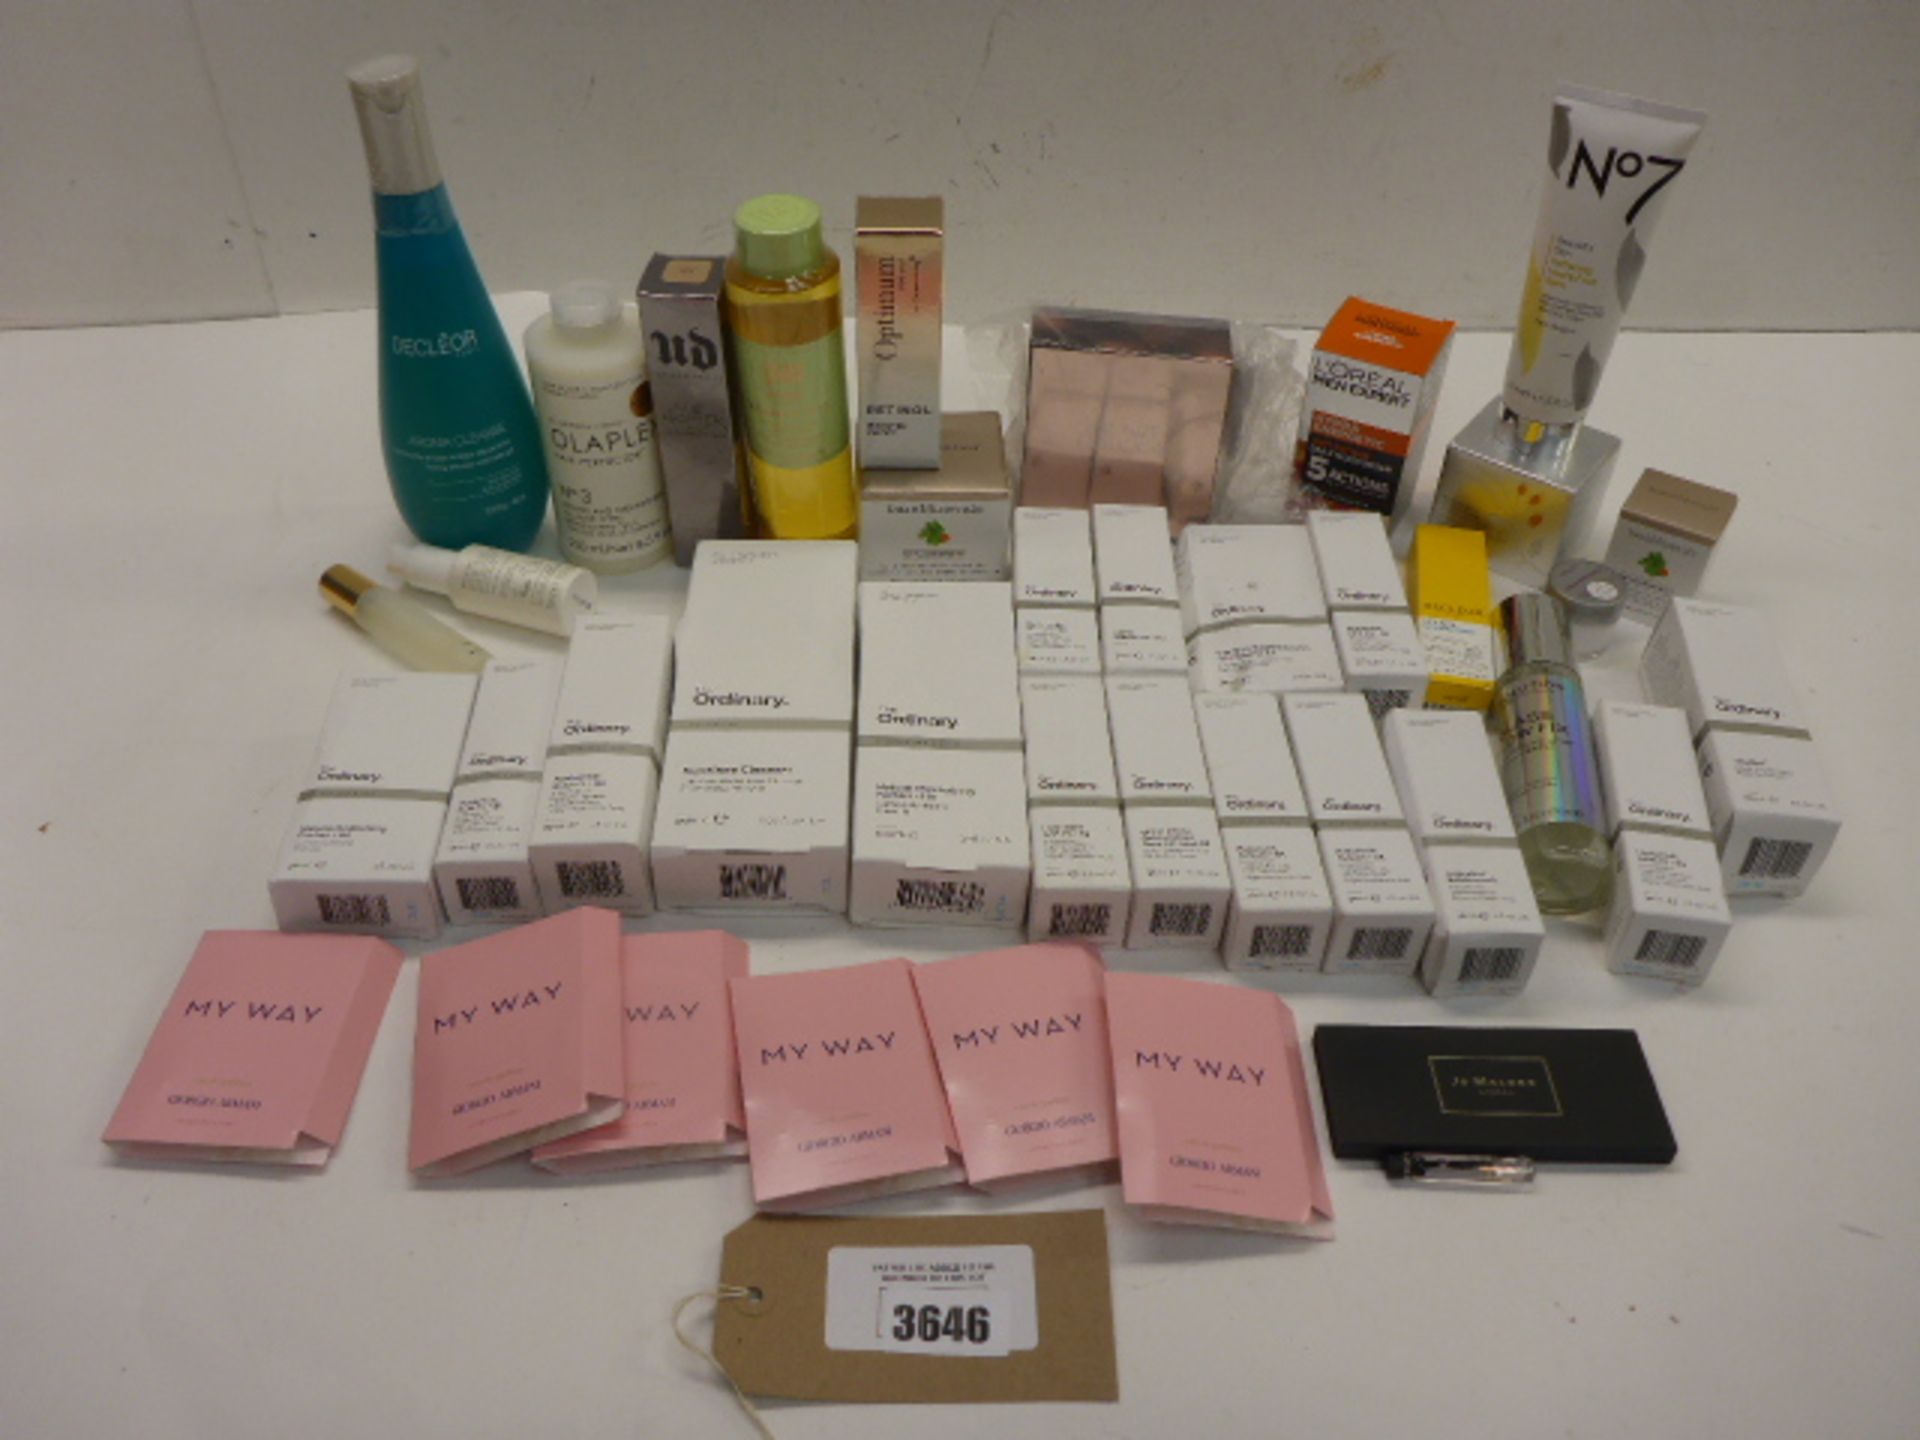 Selection of branded beauty products including Pixi, bareMinerals, Estee Lauder, The Original, UD